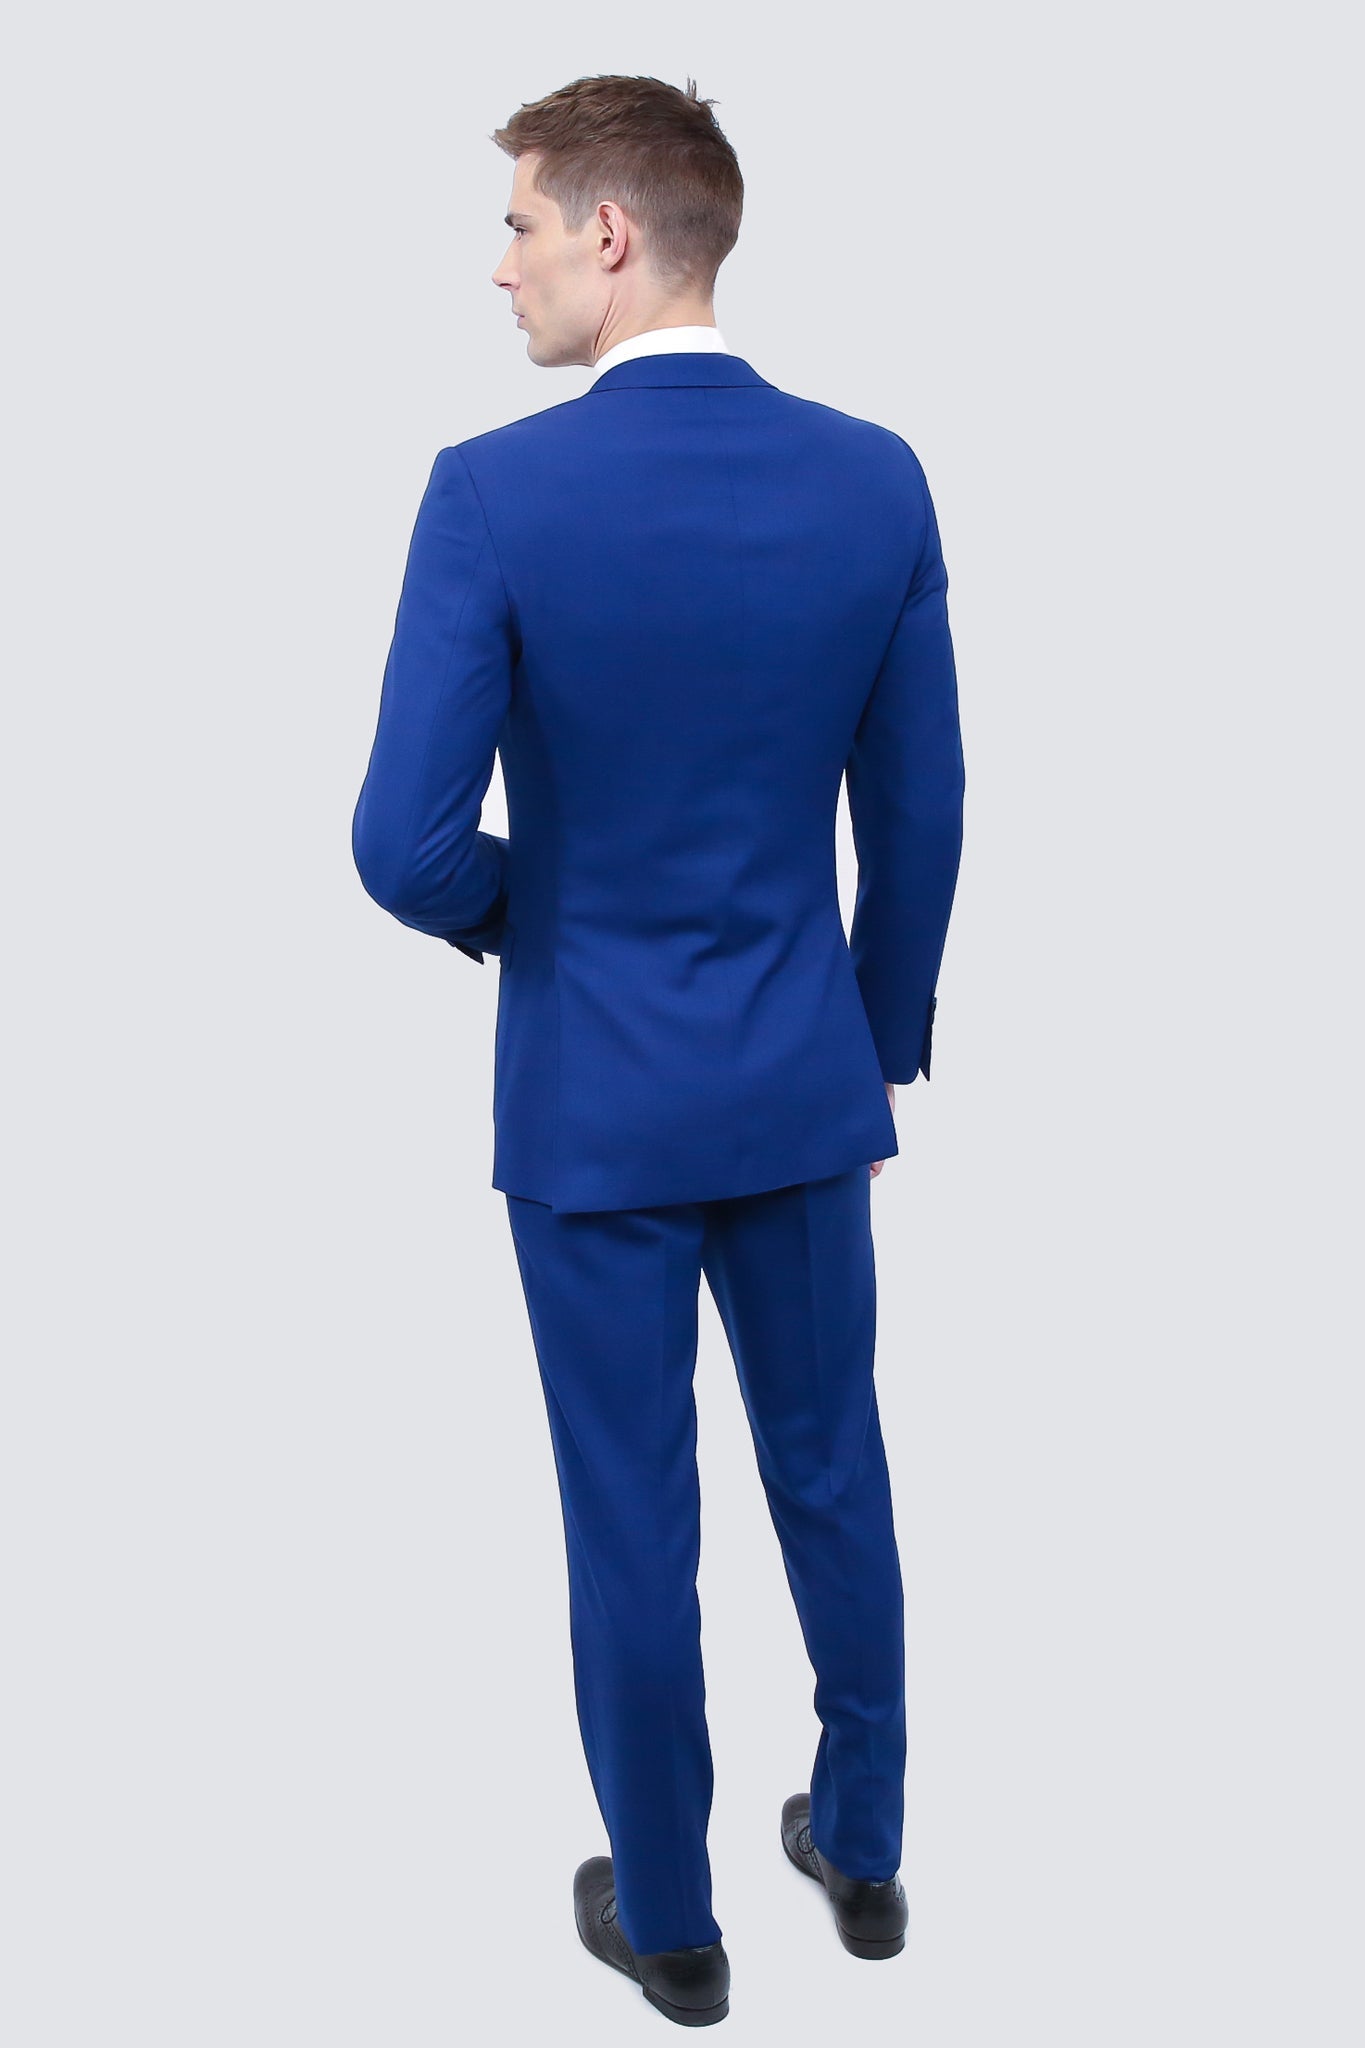 Tailor's Stretch Blend Suit | French Blue Modern or Slim Fit - My Men's Shop